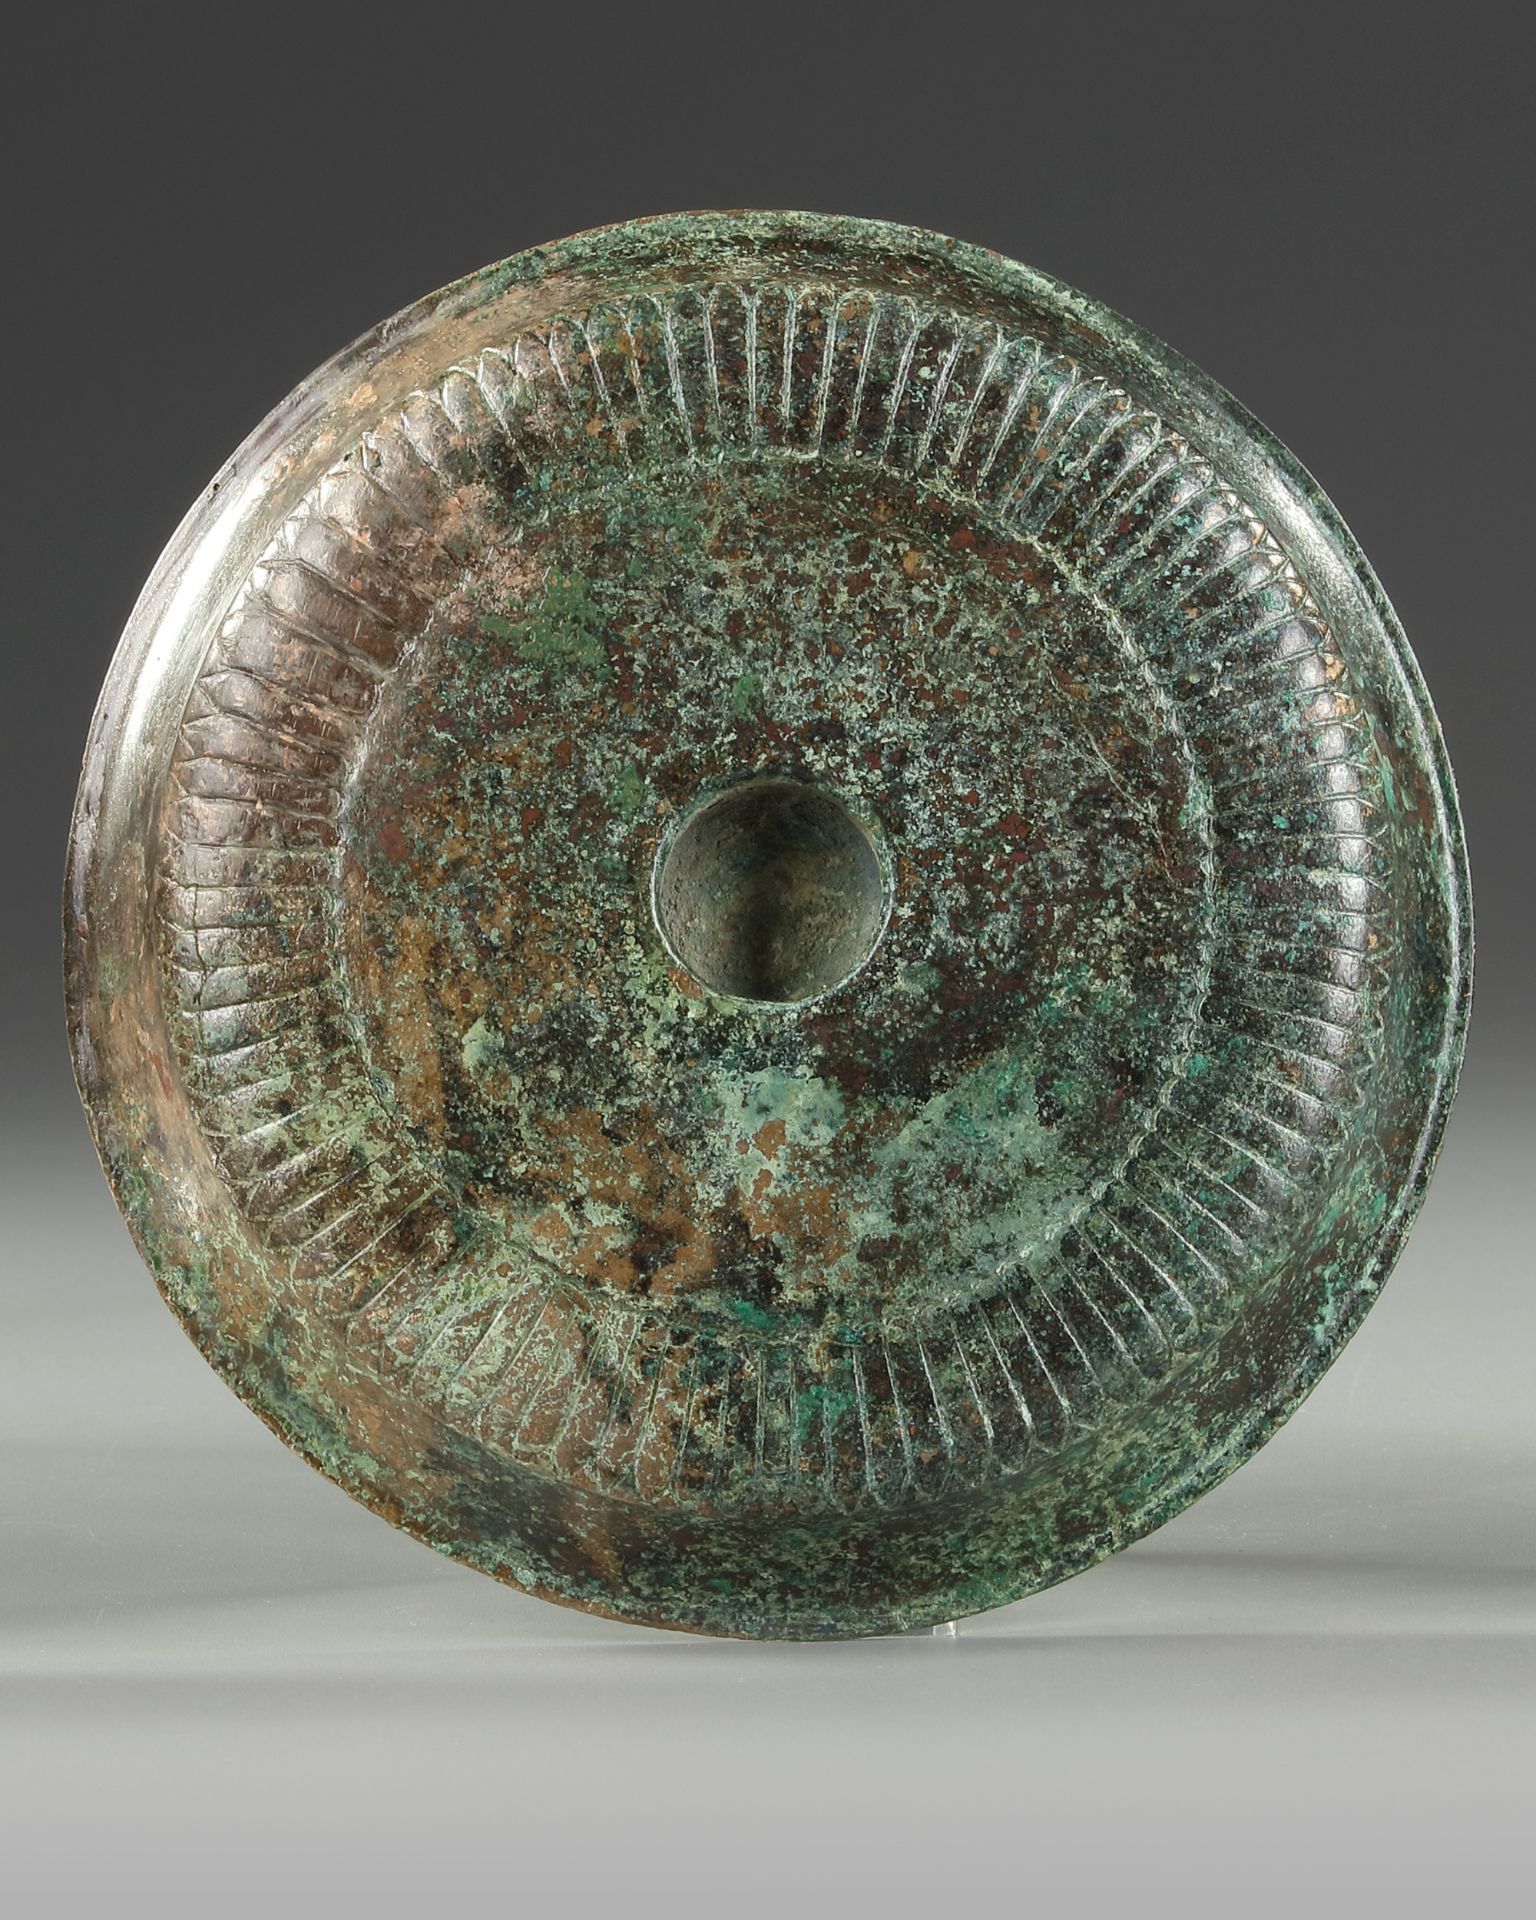 A GREEK BRONZE PHIALE, 4TH-5TH CENTURY BC - Image 2 of 3